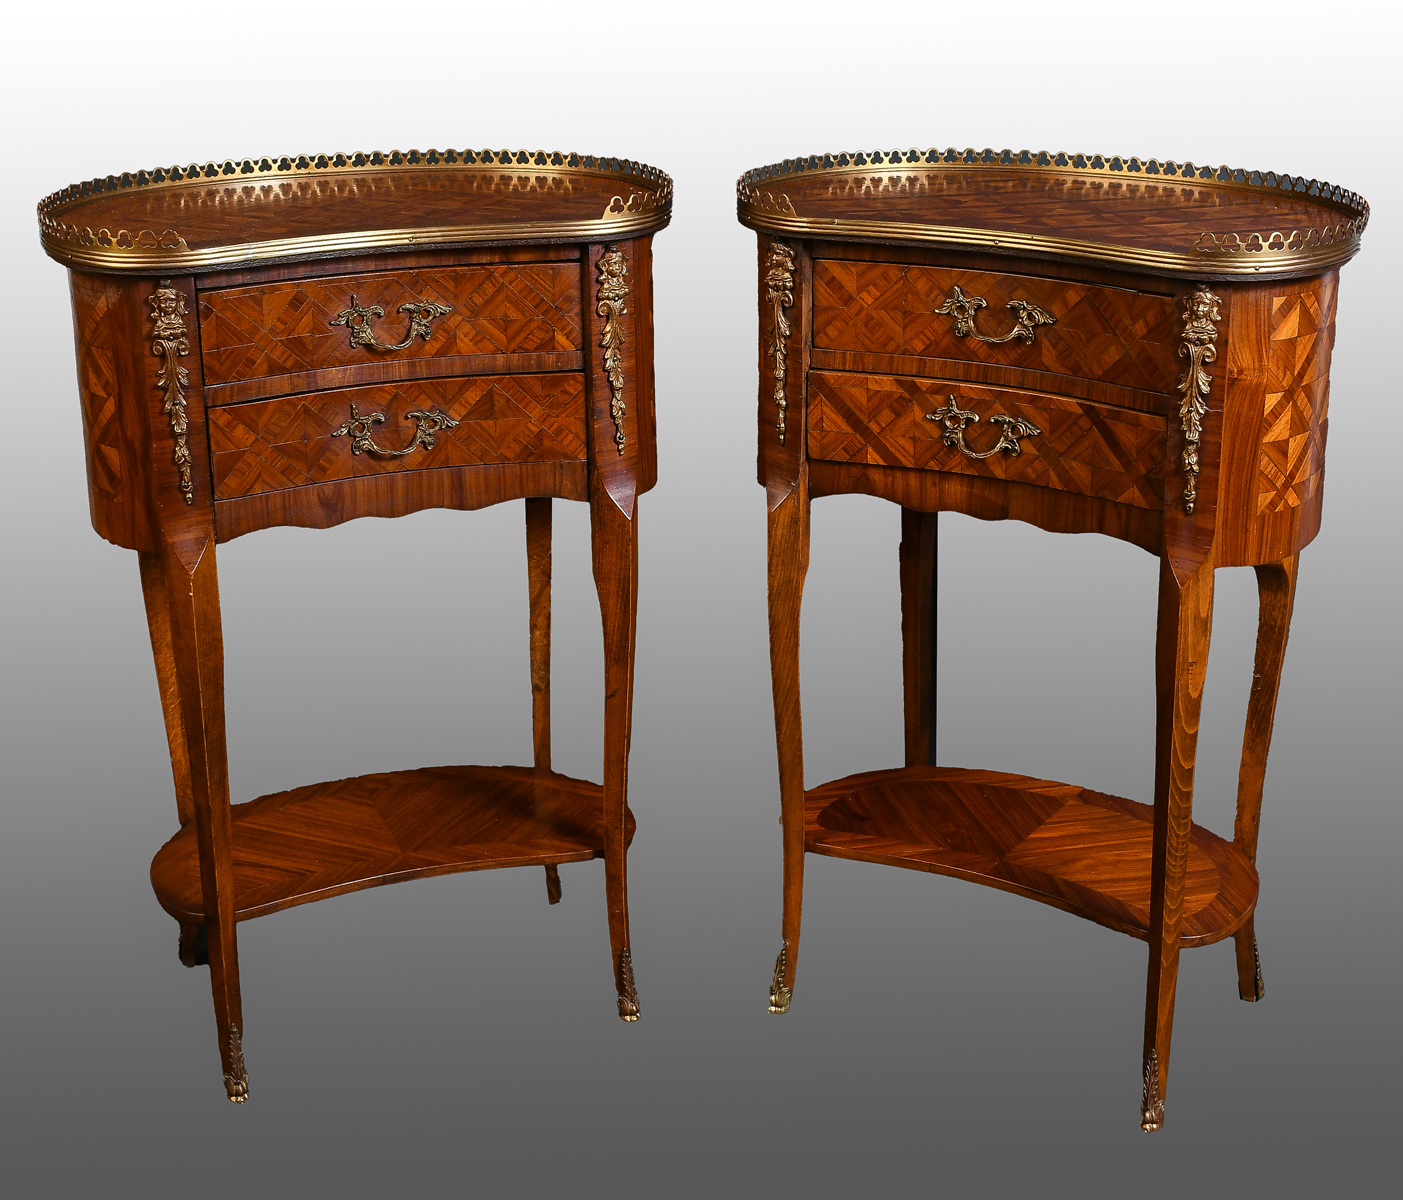 2 FRENCH PARQUETRY INLAID LAMP